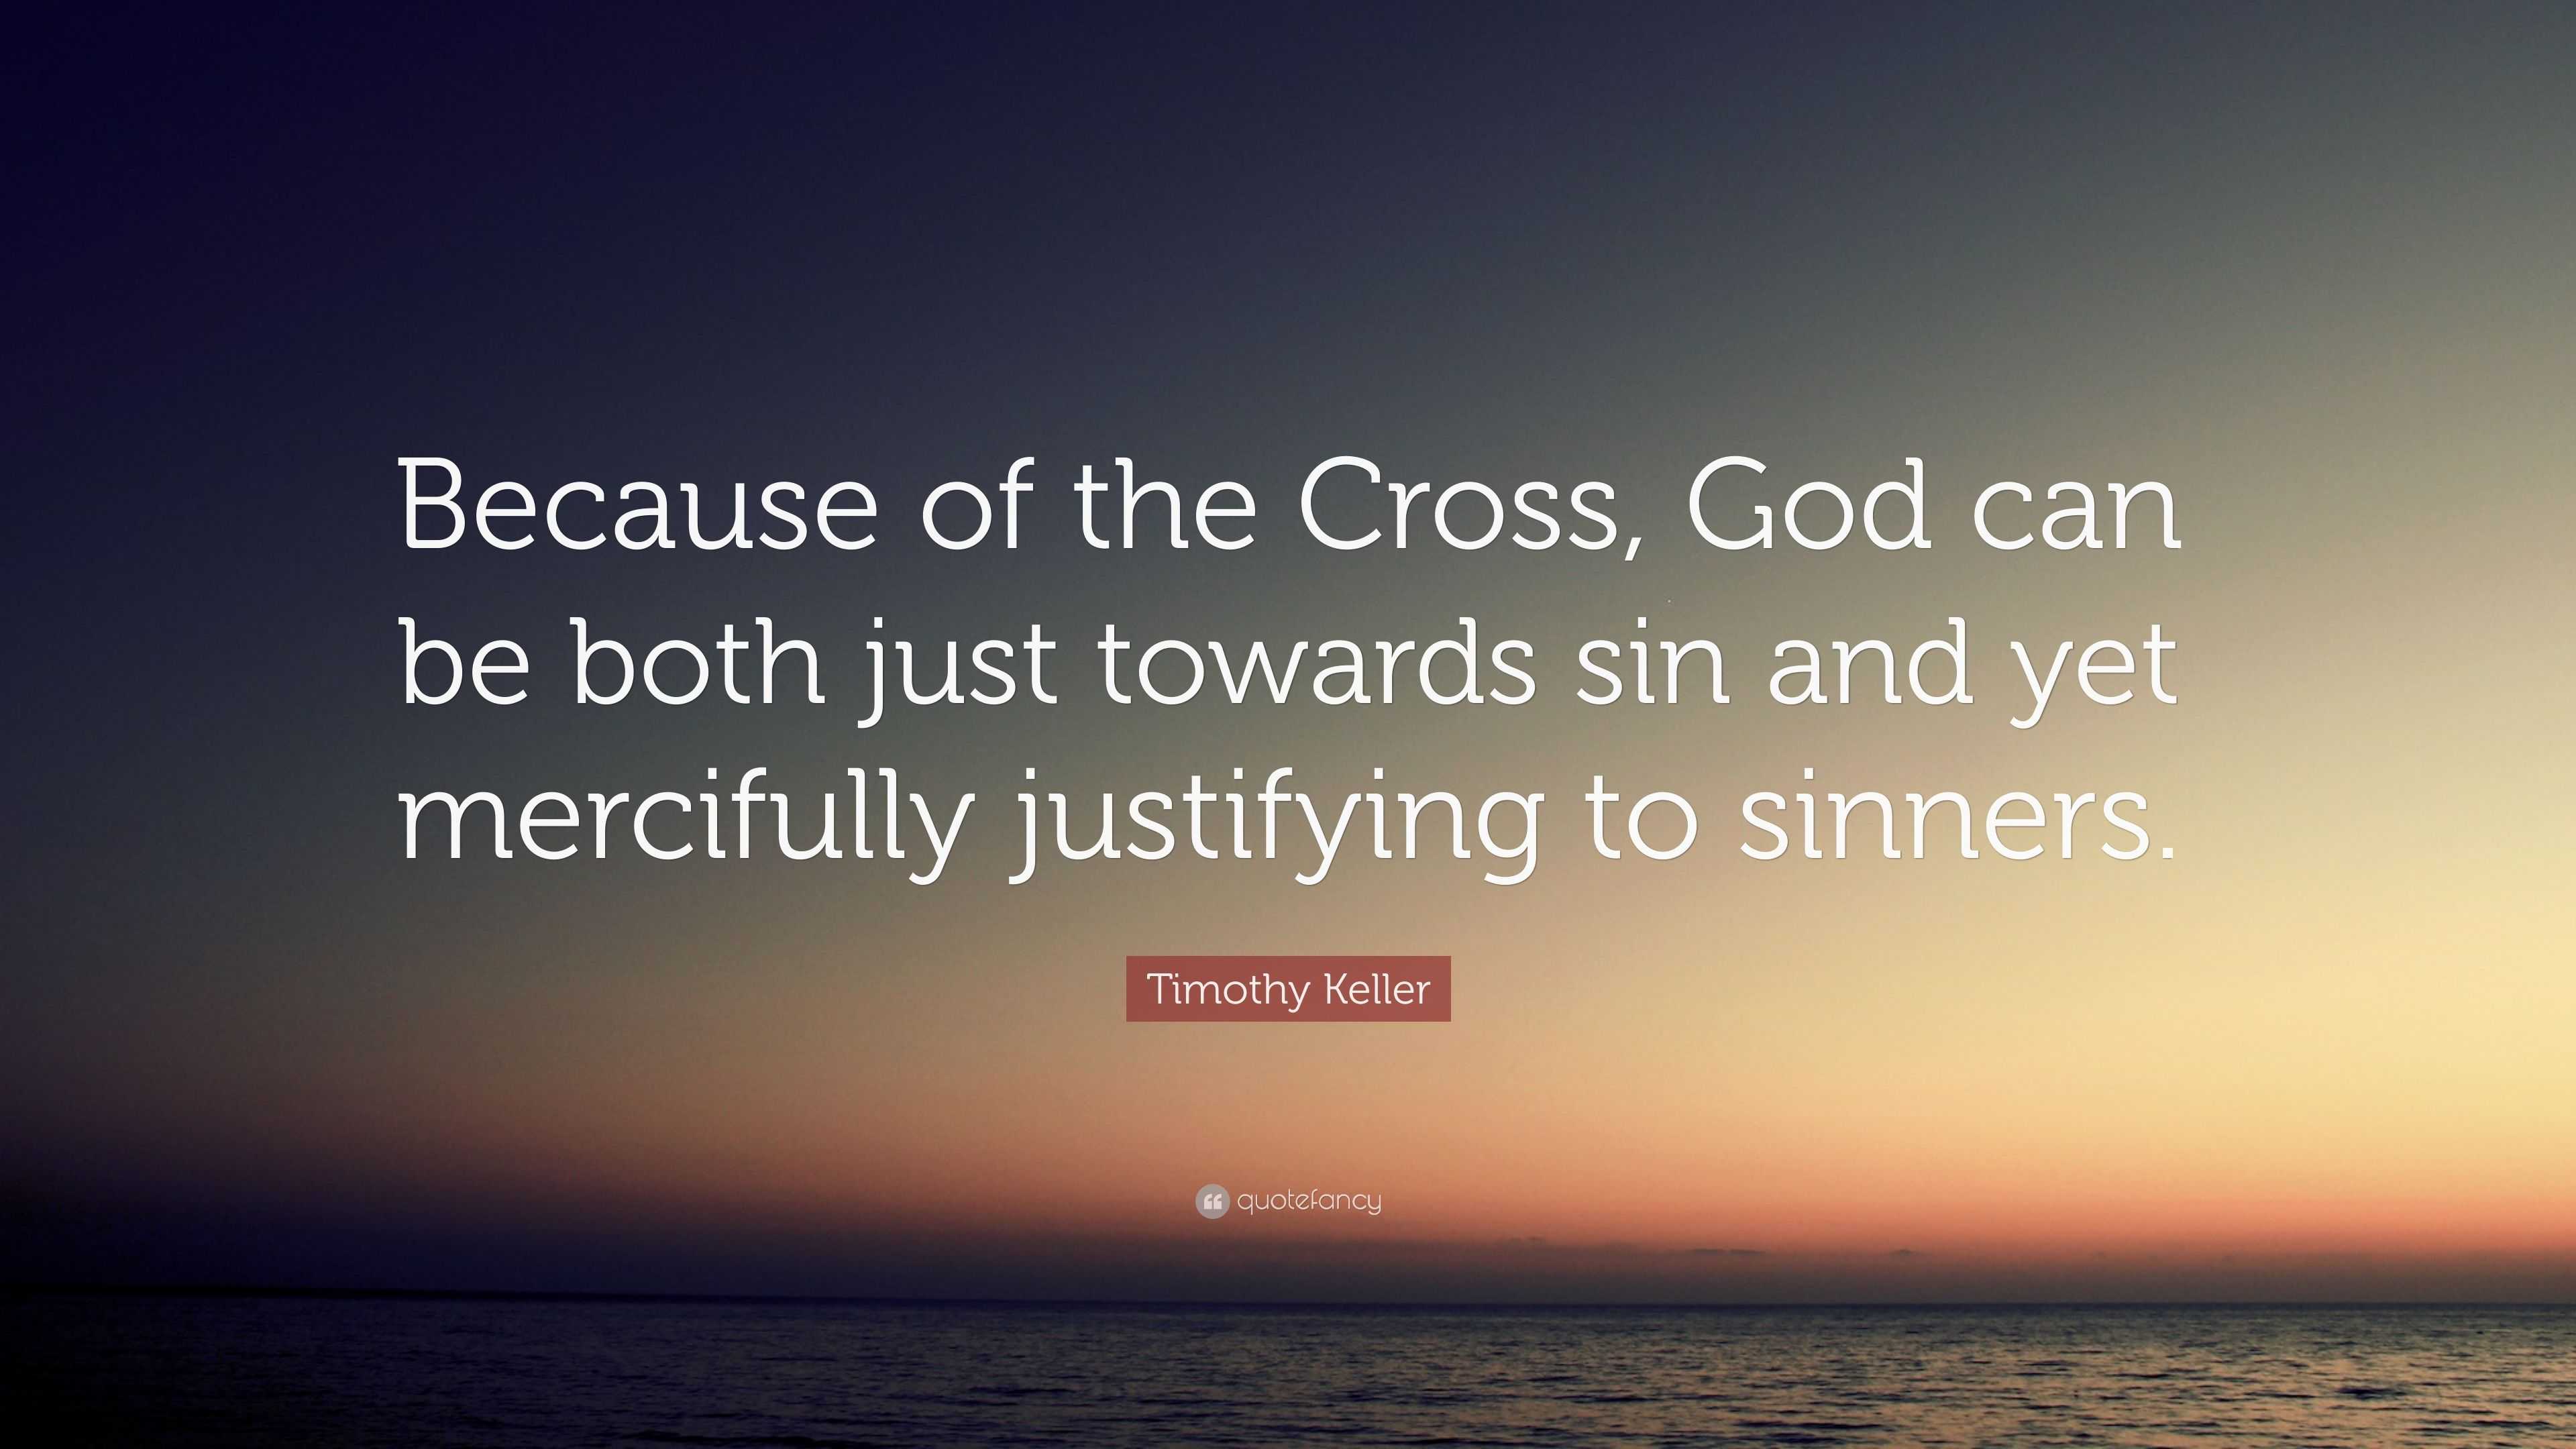 Timothy Keller Quote: “Because of the Cross